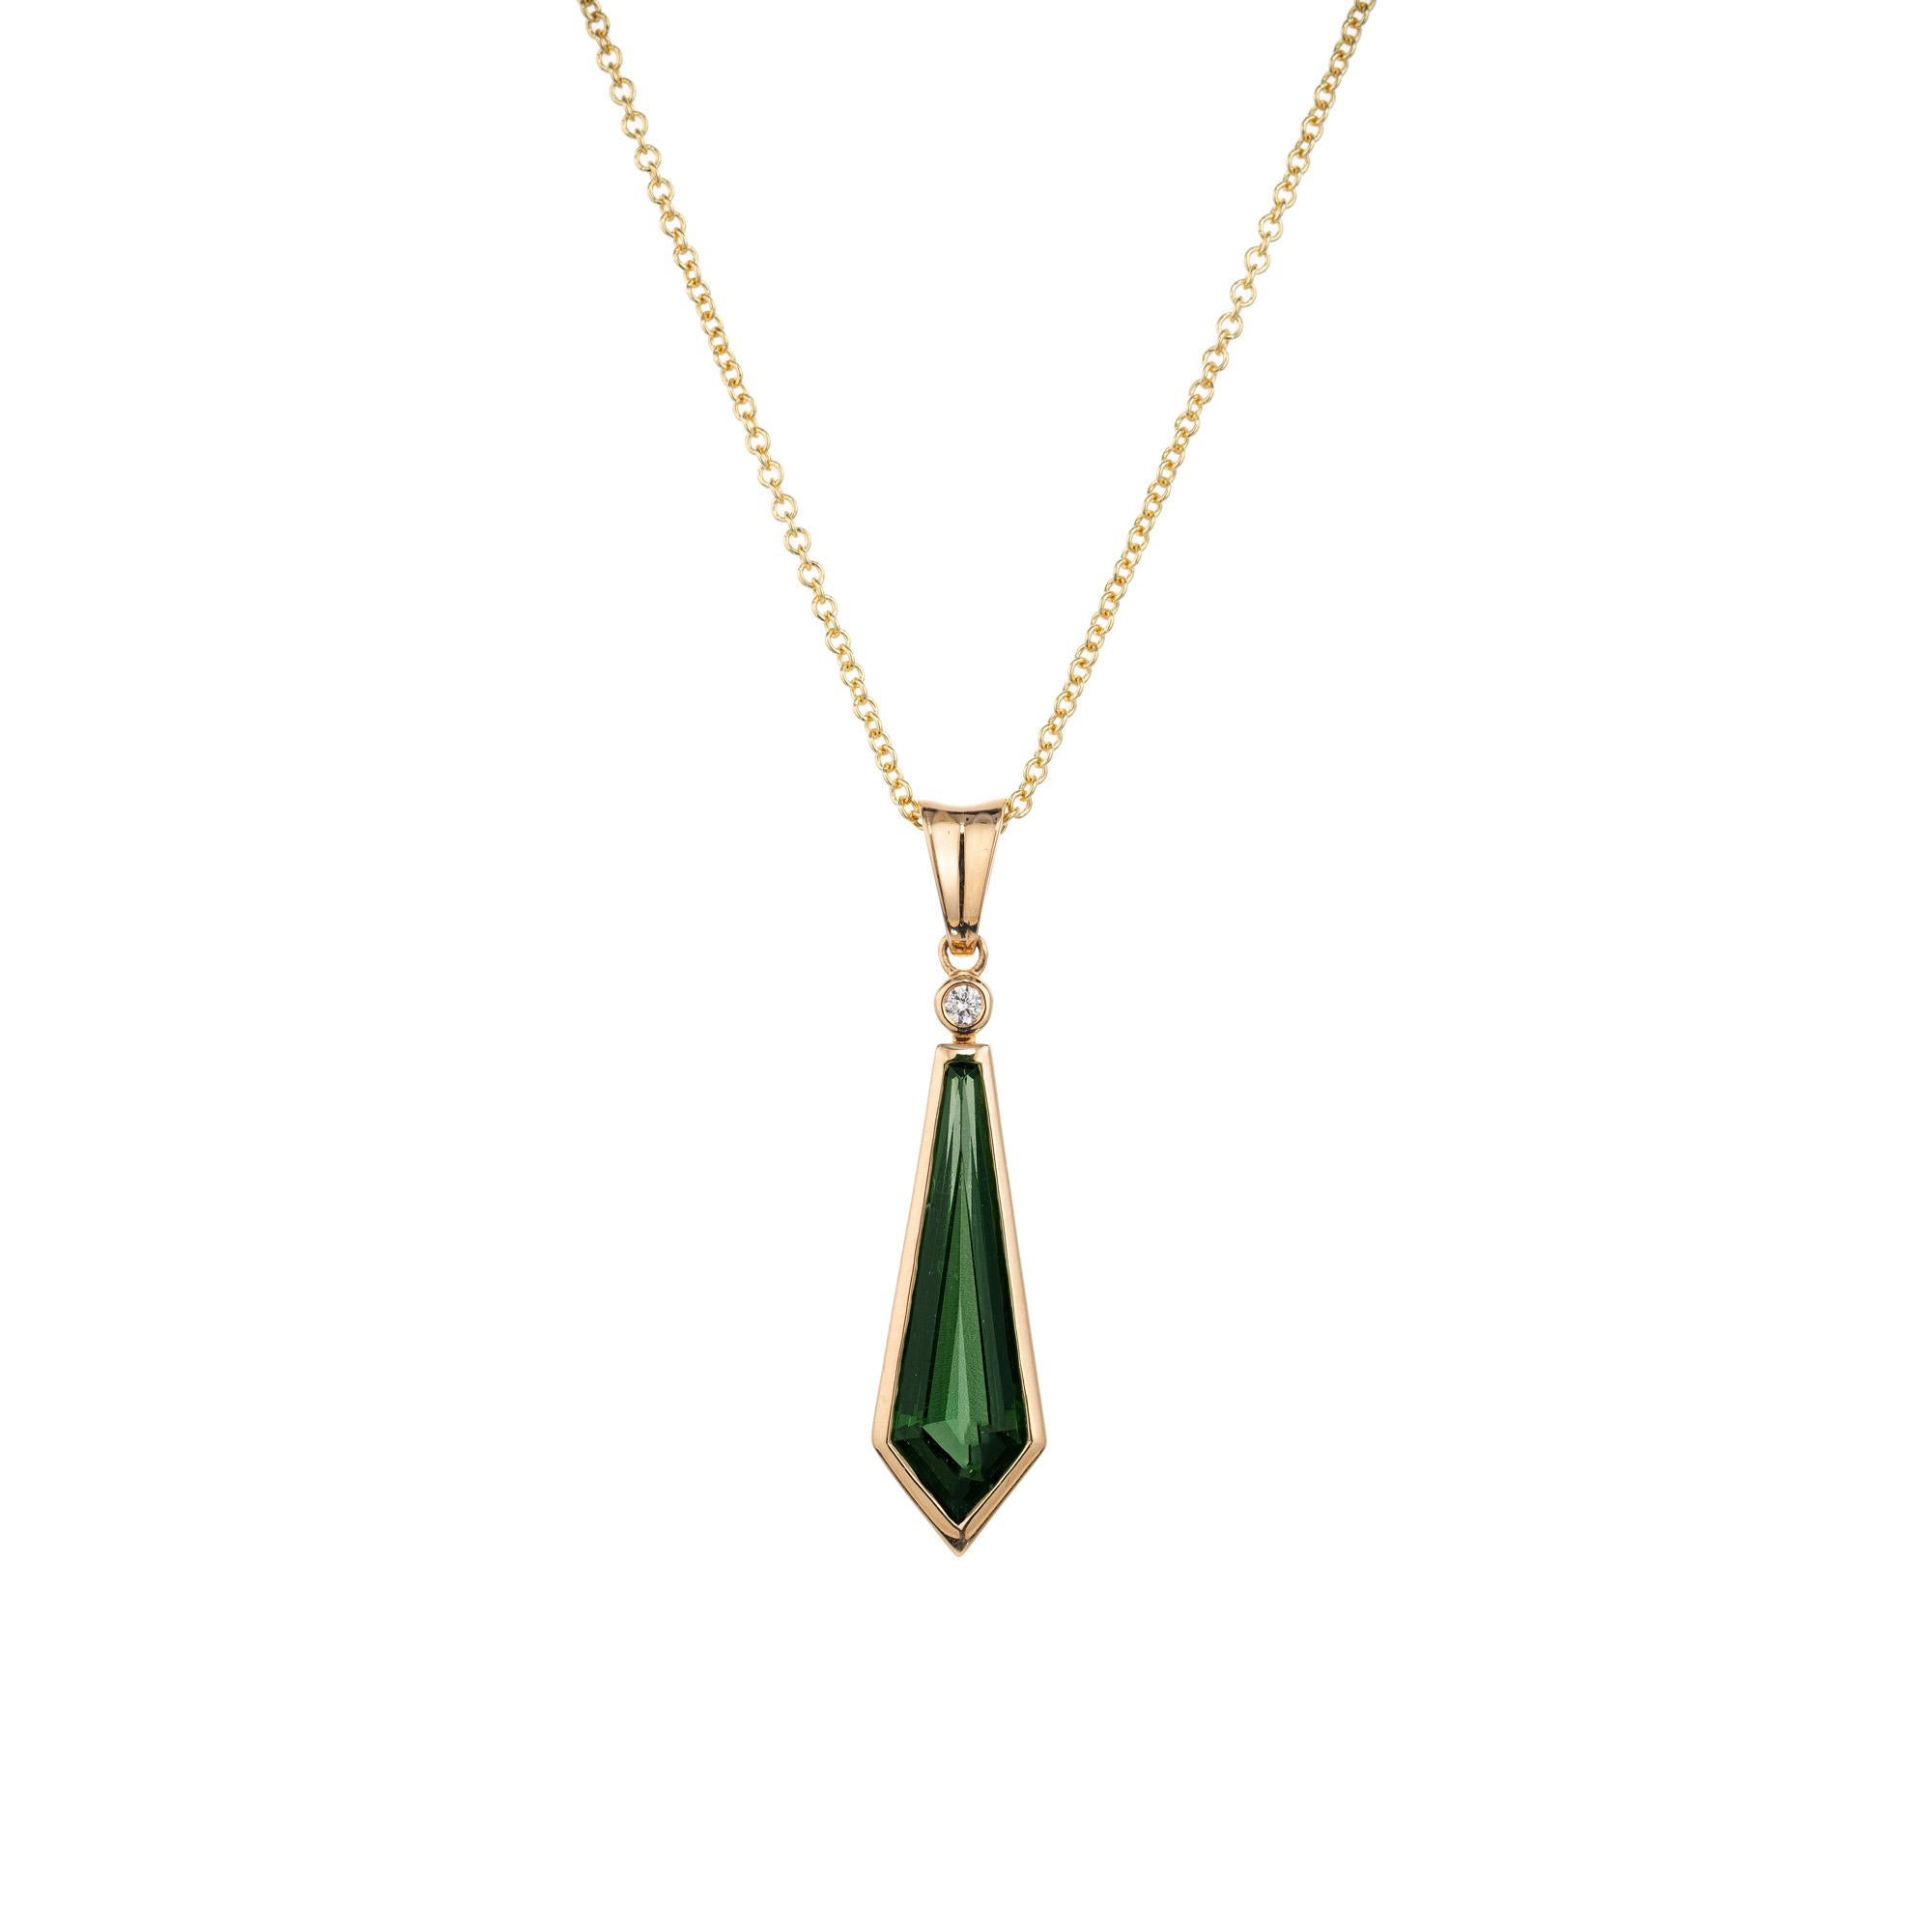 This pendant is a bright green kite shaped tourmaline diamond necklace set in a 14k yellow gold frame with a bezel set diamond on top. The tourmaline is 2.87 carats while the round diamond above it is .03cts, making a compelling timeless design that